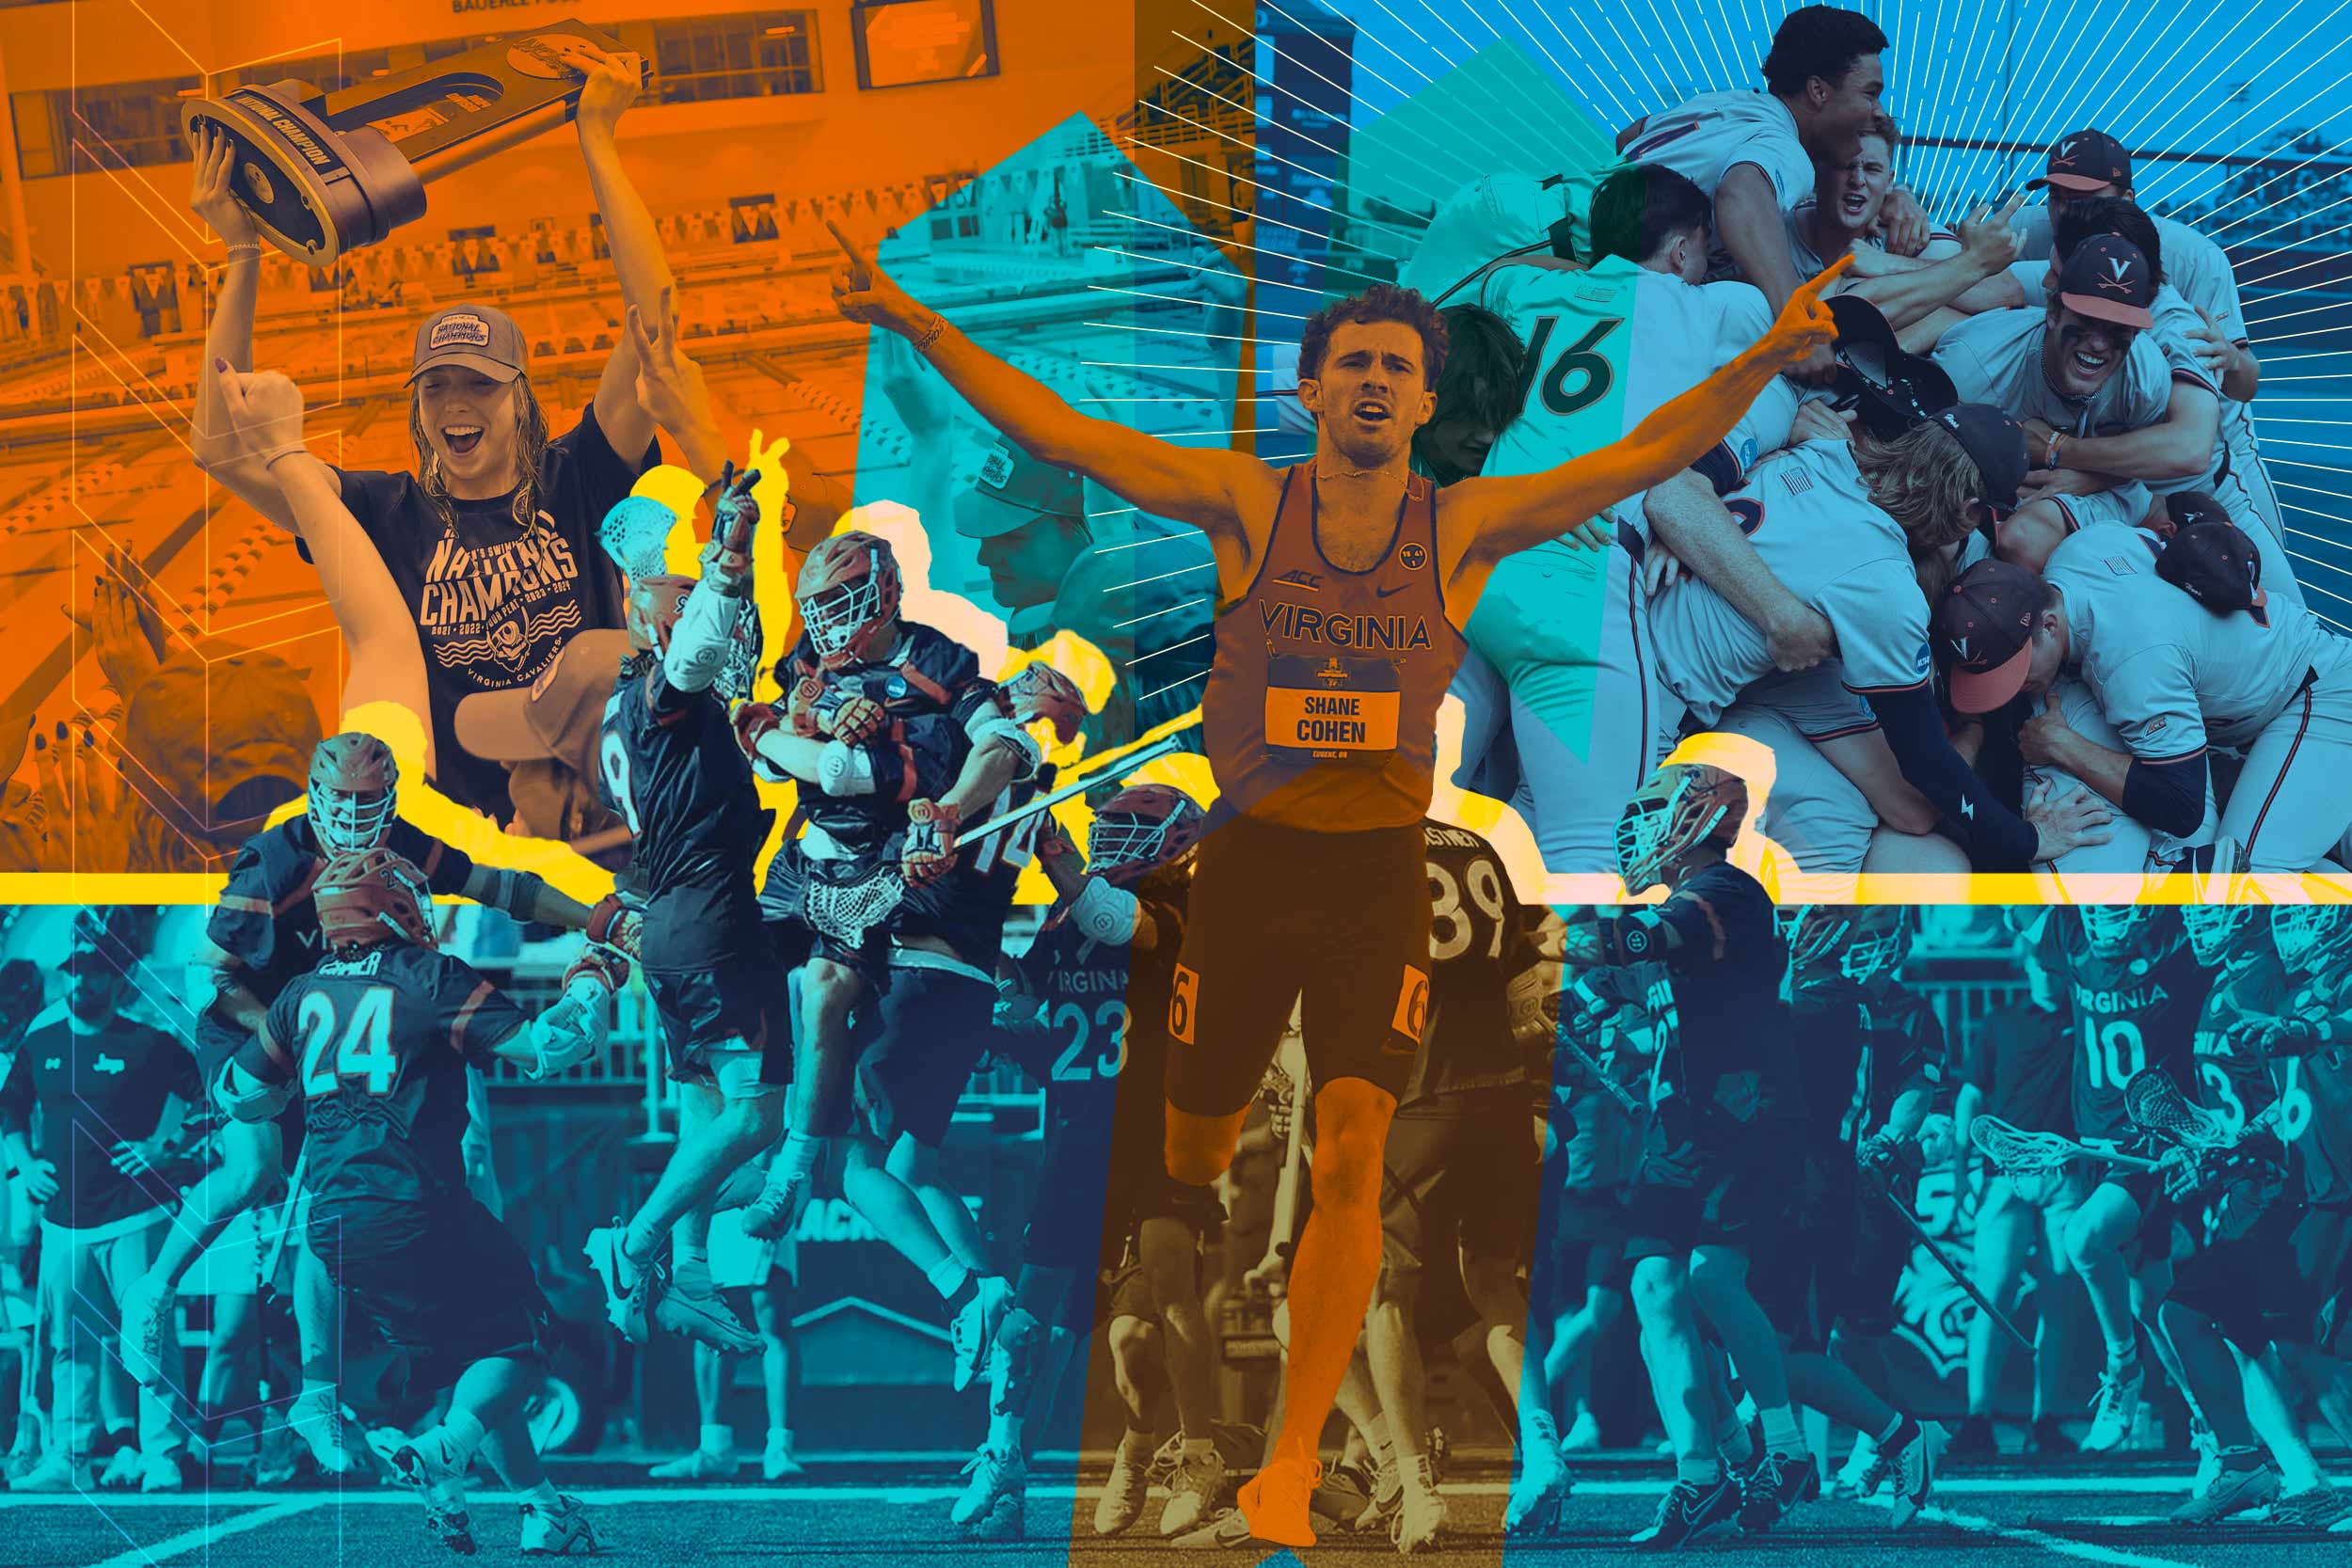 A graphic collage of various UVA sports